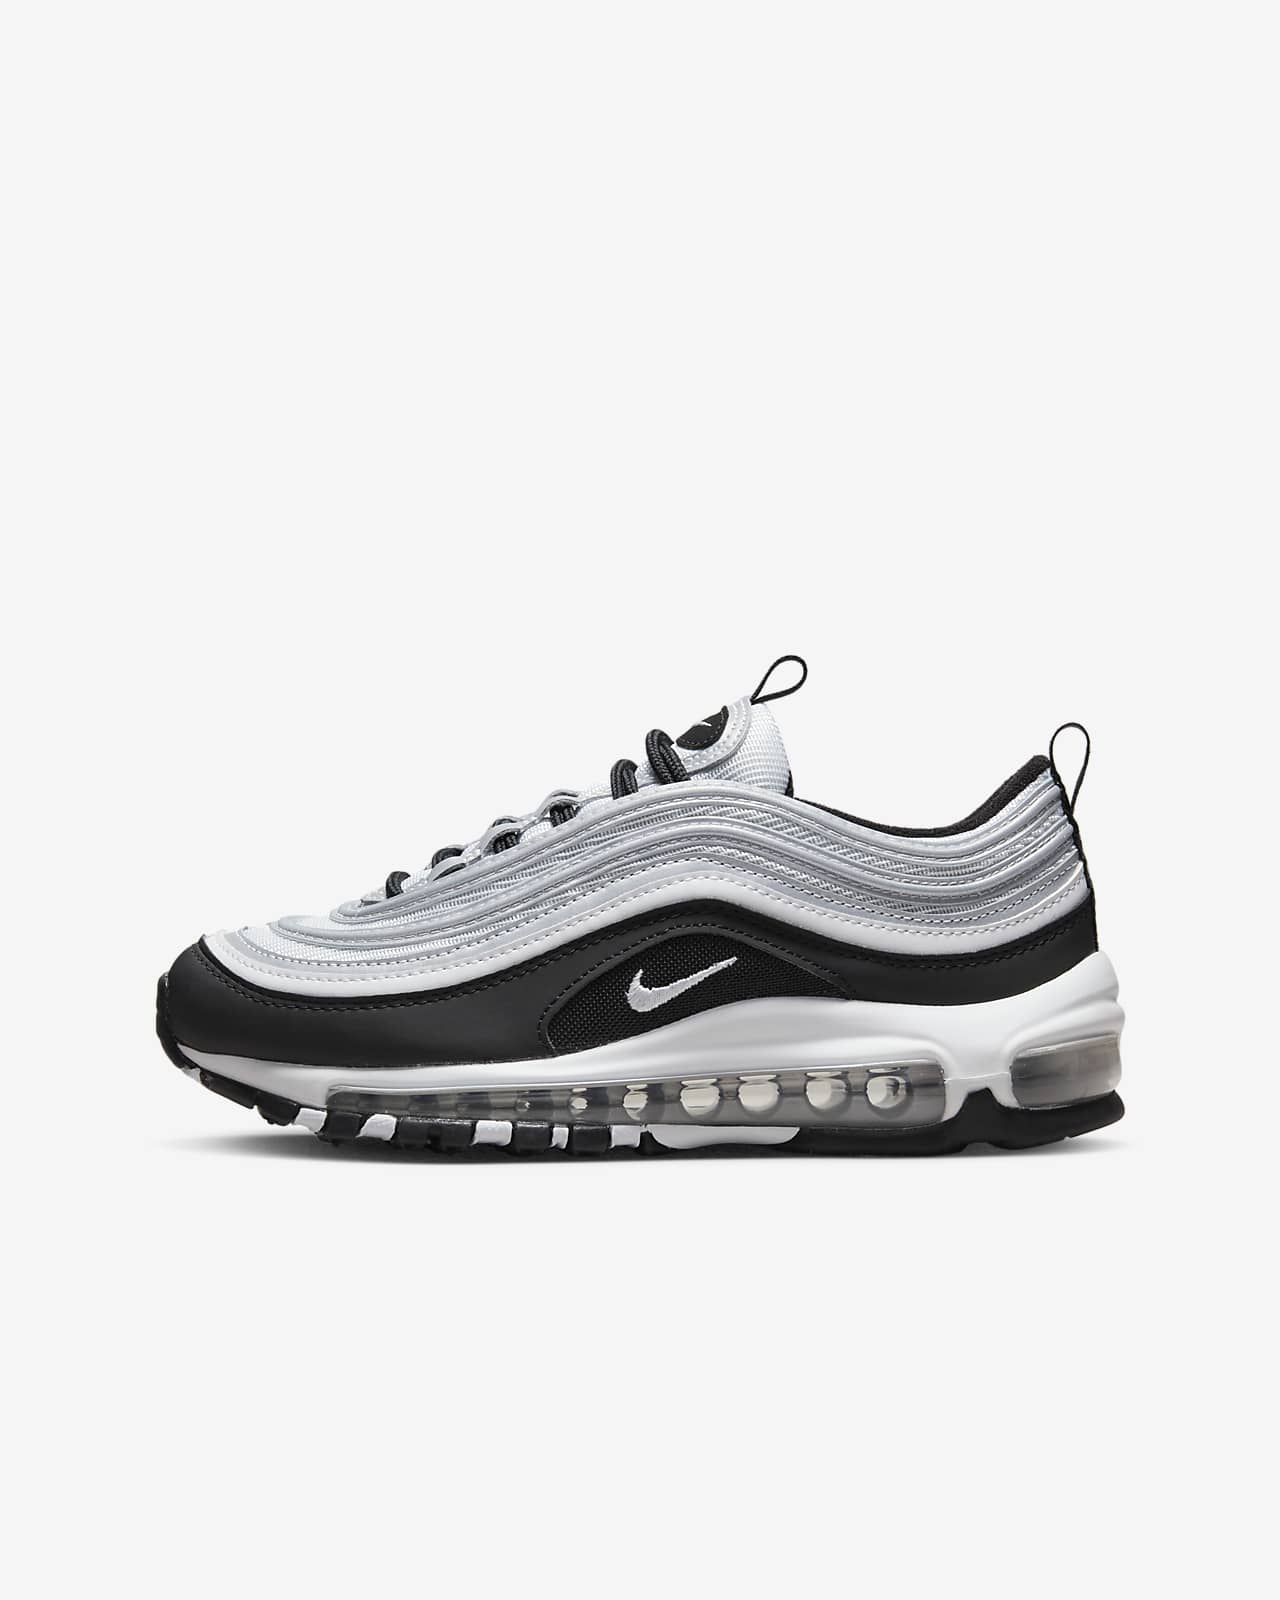 Nike Air Max 97 Shoes in Black/Anthracite/White